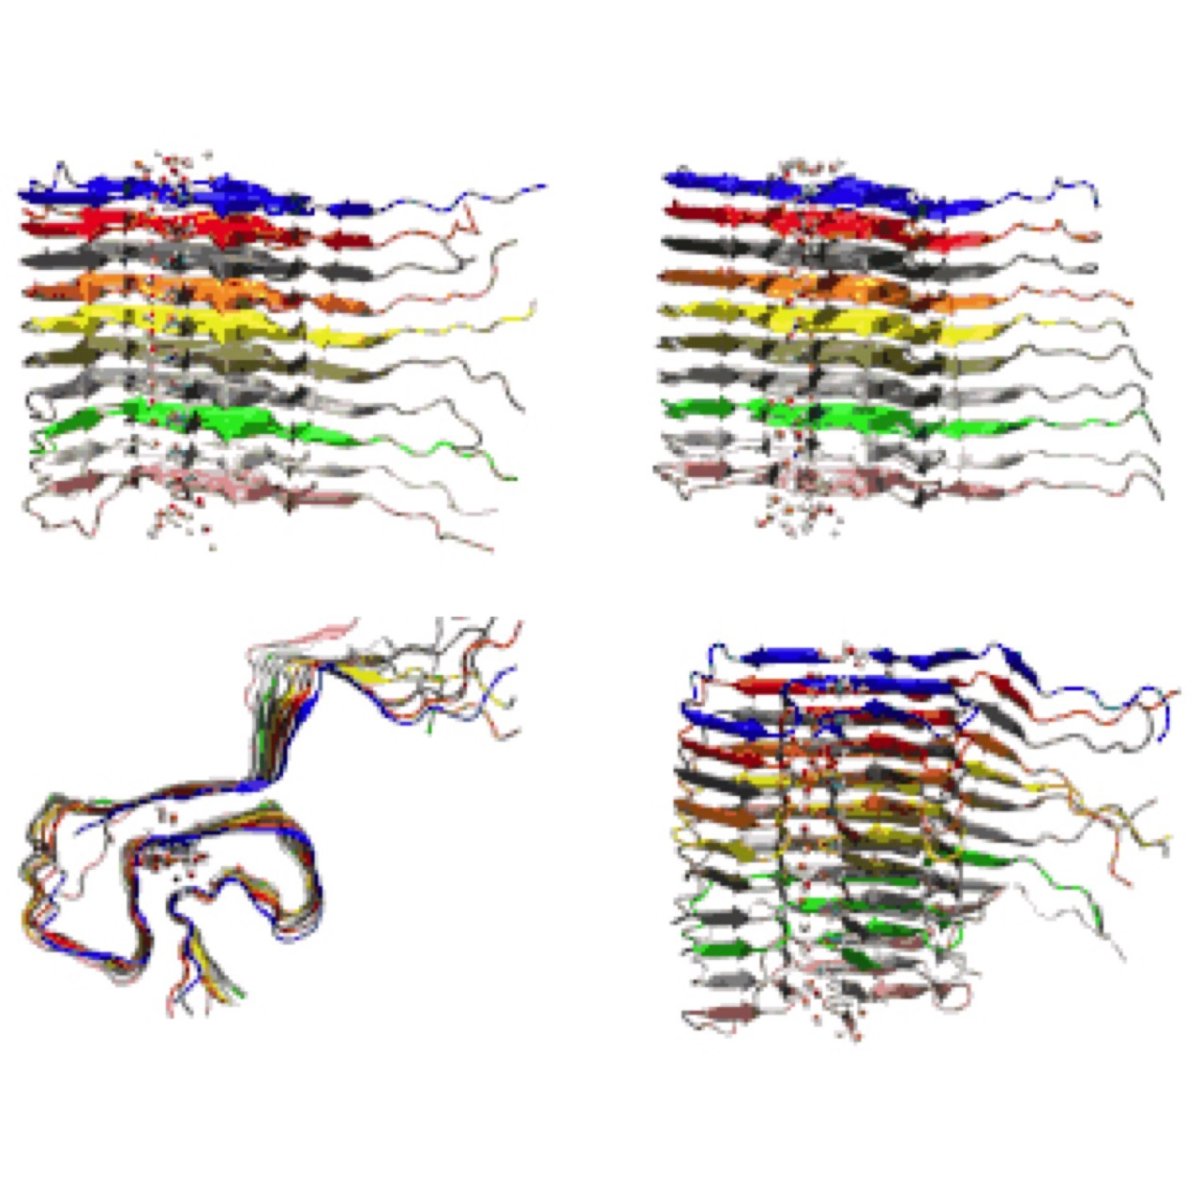 Computer-generated graphic of colored strips at the molecular level; conveys movement